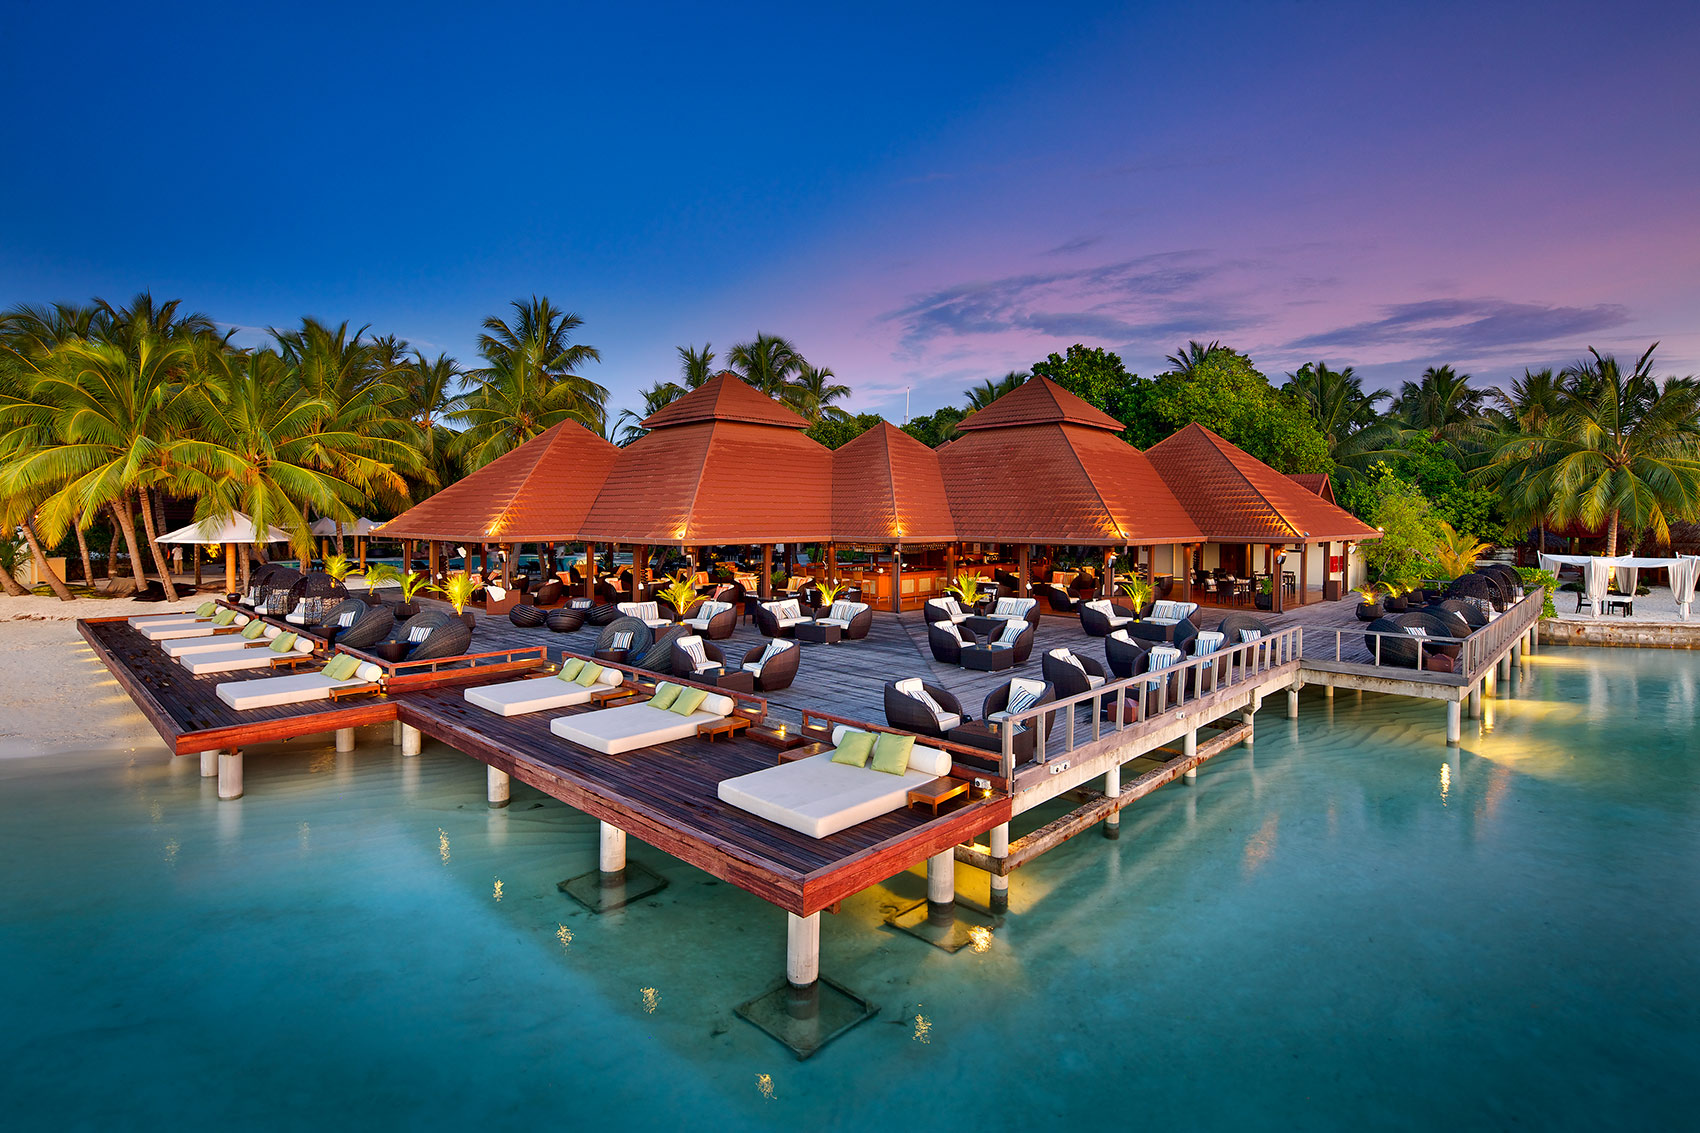 maldives local island tour package